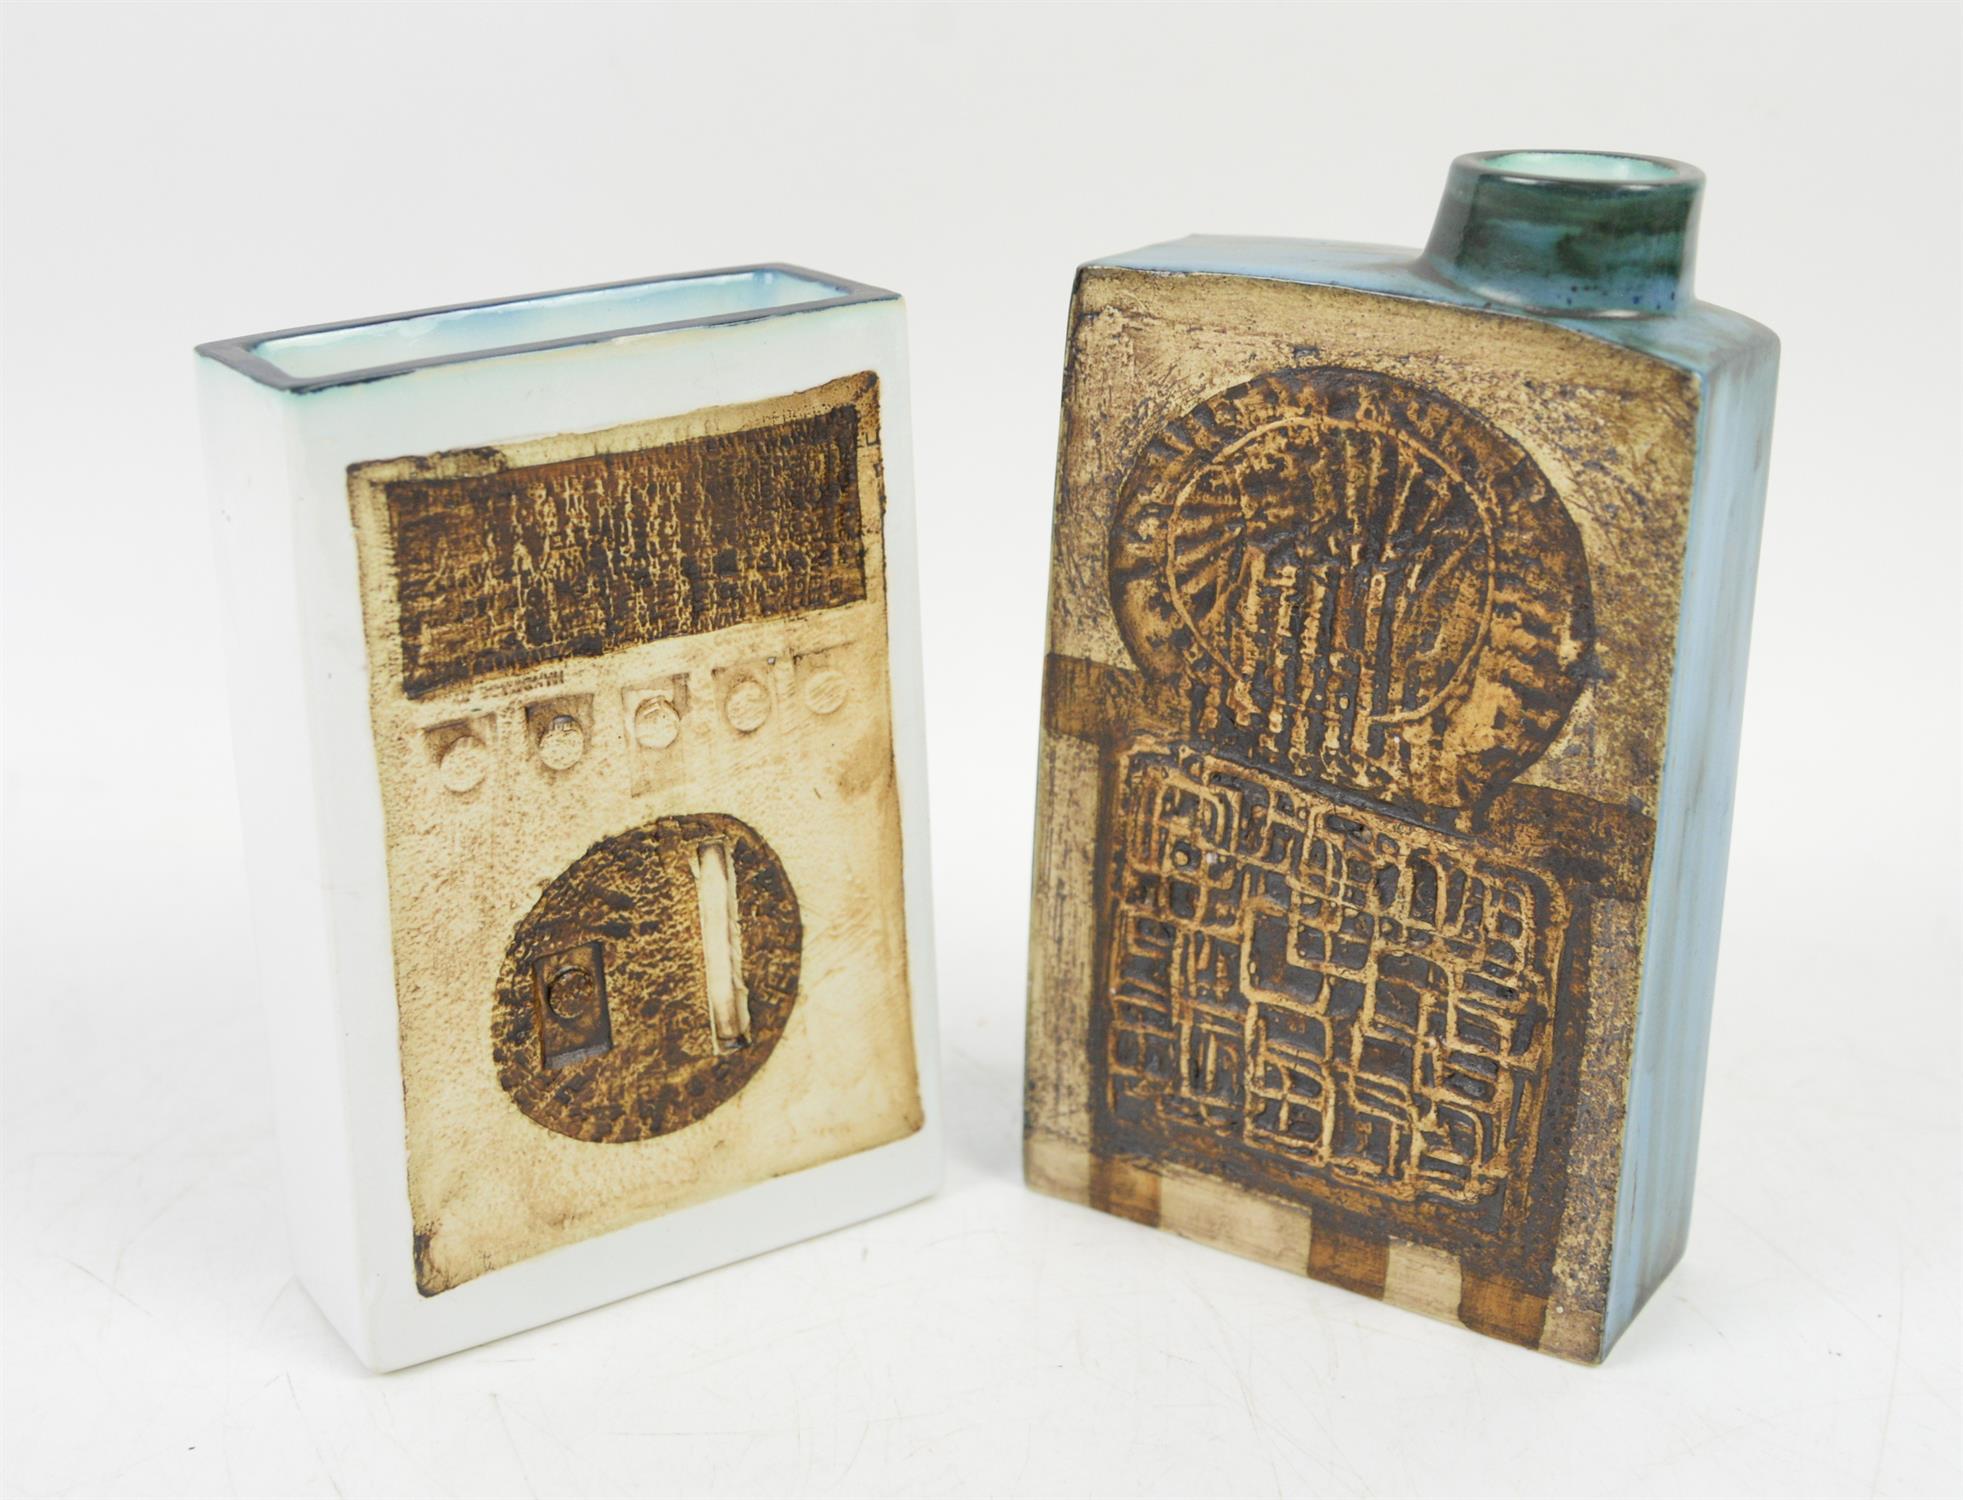 Troika pottery chimney slab vase, marked 'Troika St. Ives England' and with artist's monogram to - Image 2 of 3